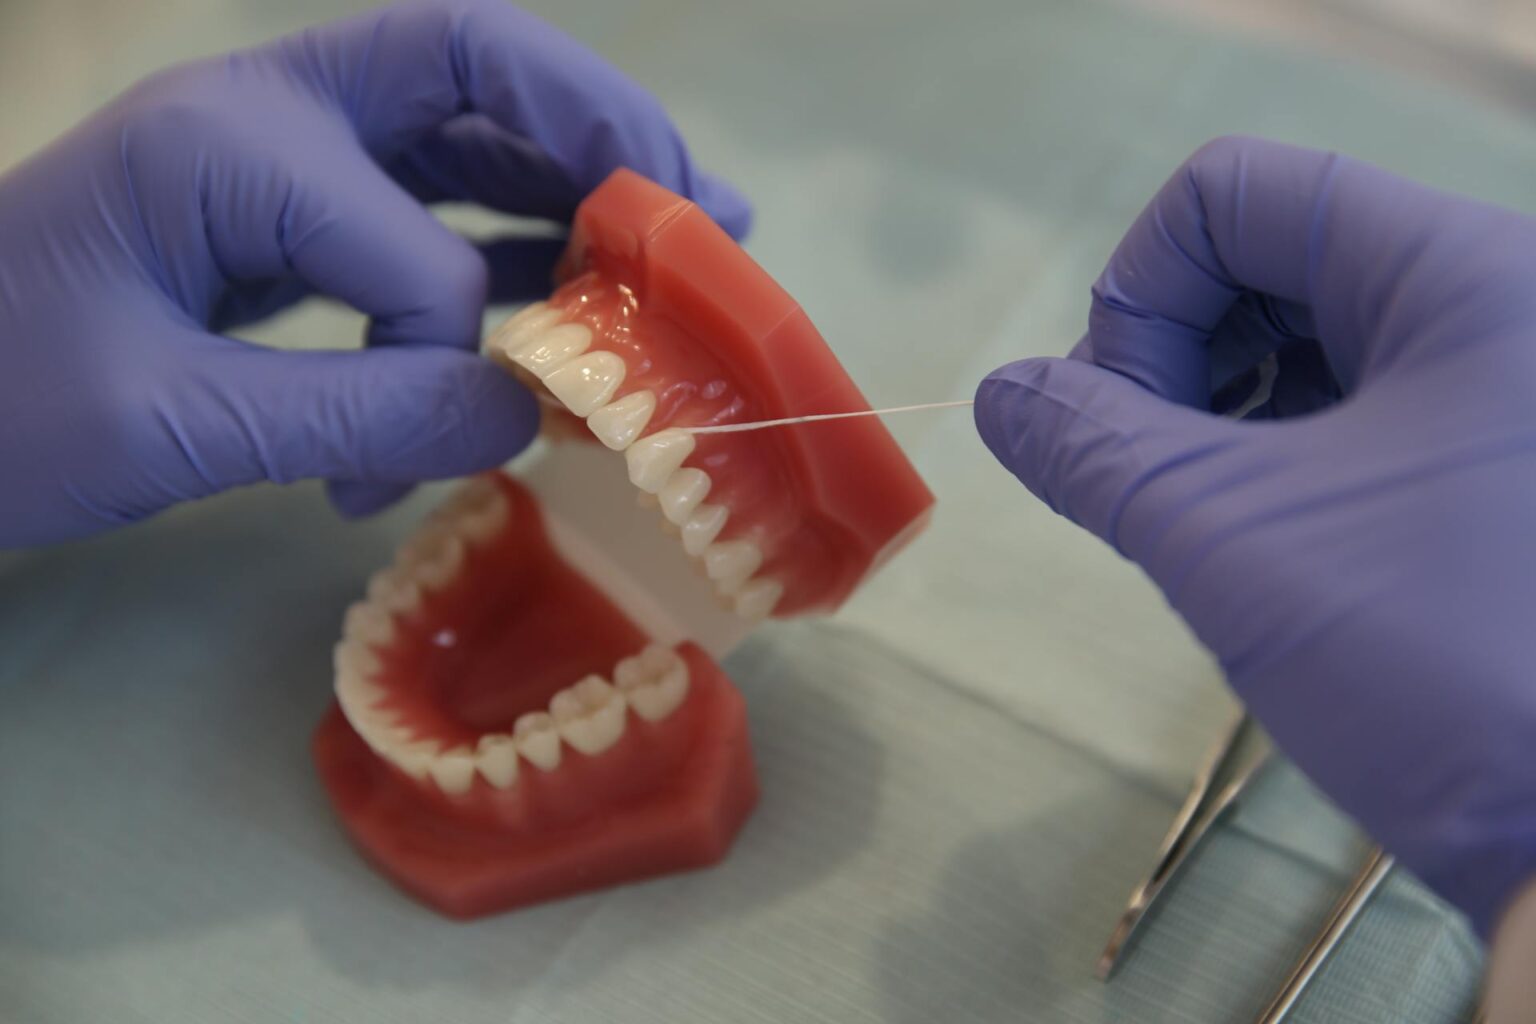 How Can Artificial Intellingence Help With Straightening Teeth?